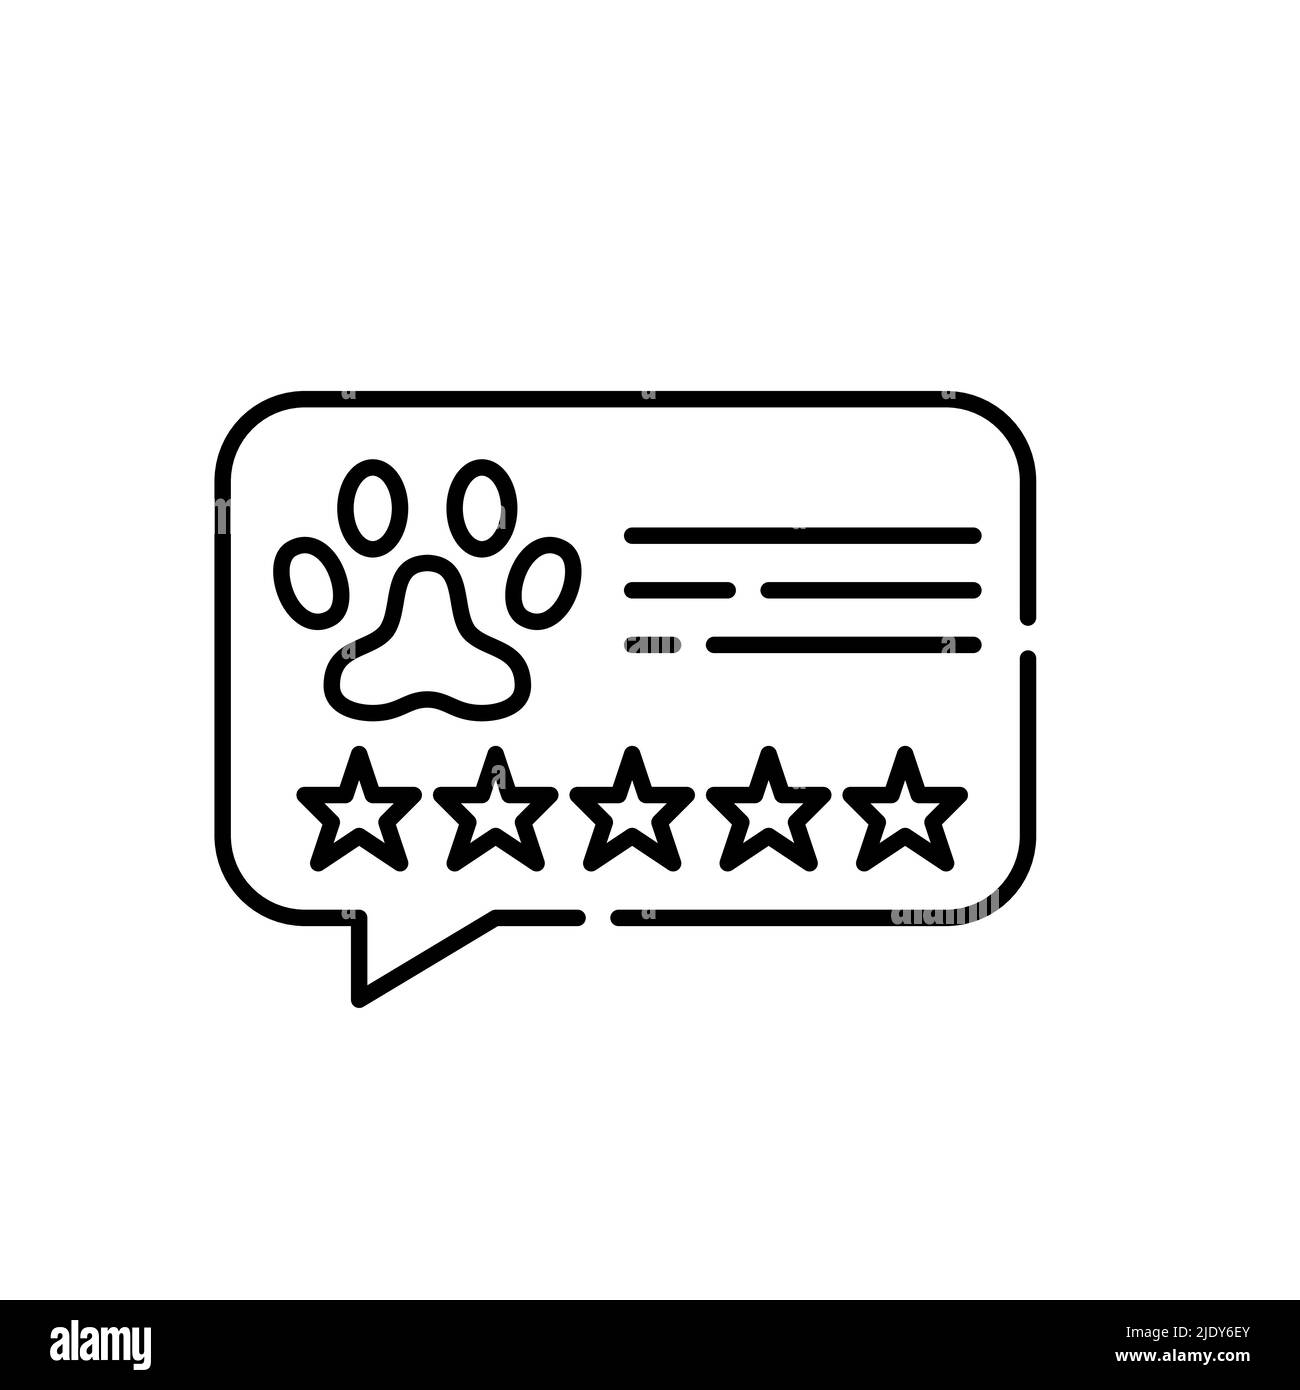 5 star review for animal care services such as veterinary clinic or pet shop. Pixel perfect, editable stroke line icon Stock Vector